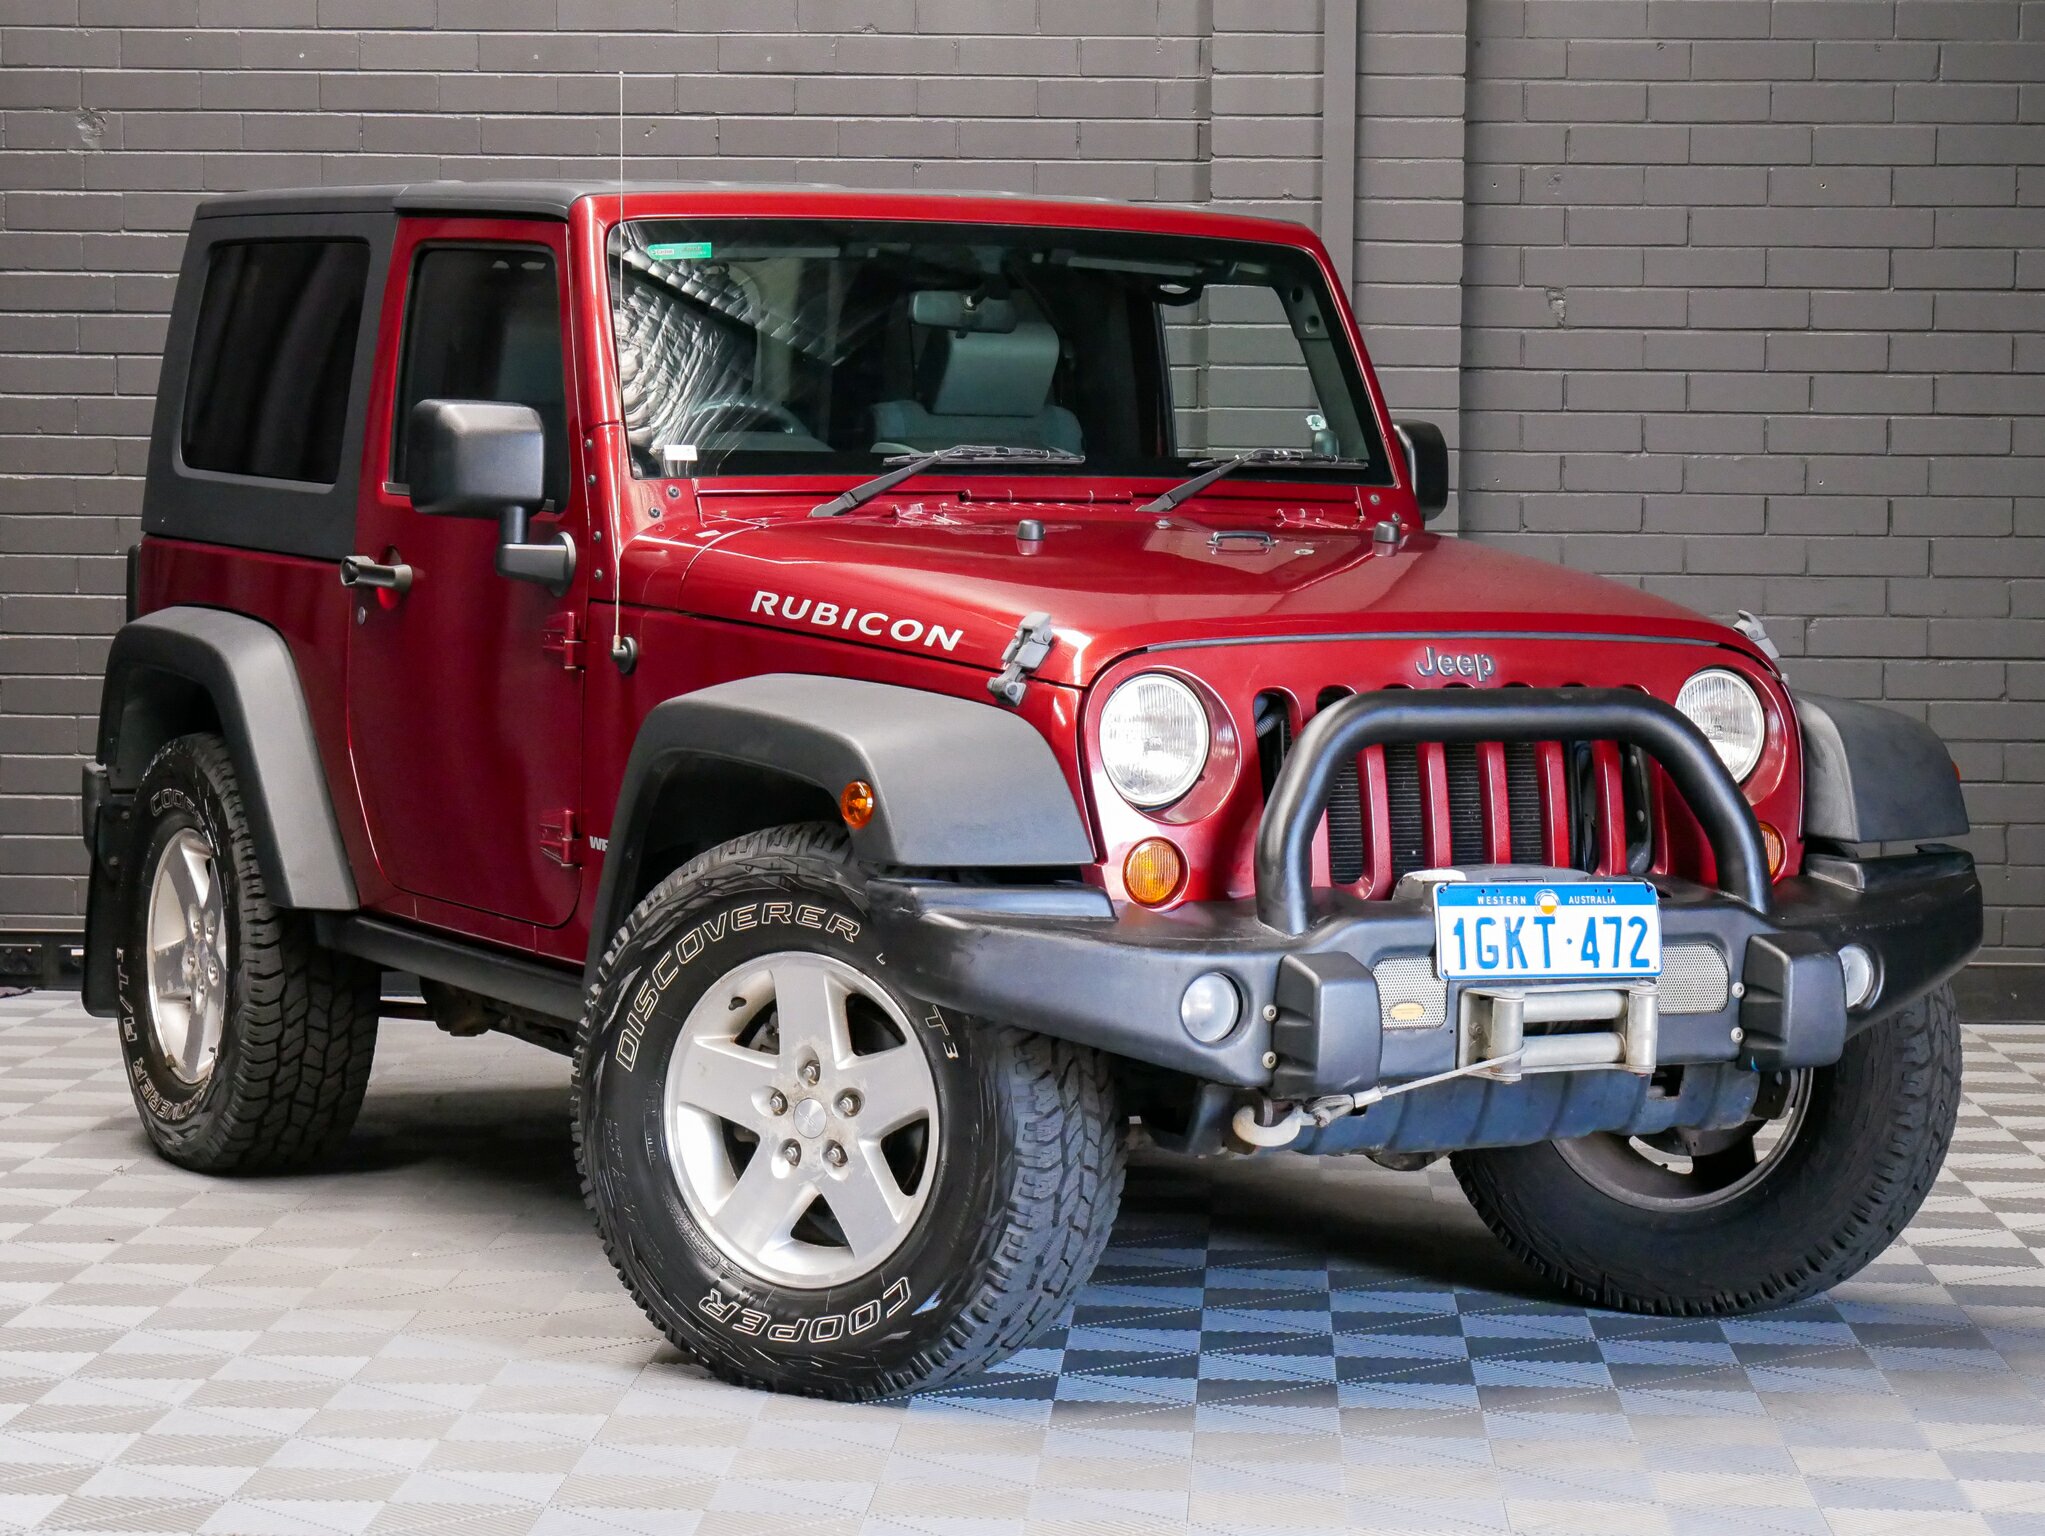 Used 2007 JEEP WRANGLER at Canning Vale Used Cars in Canning Vale, WA